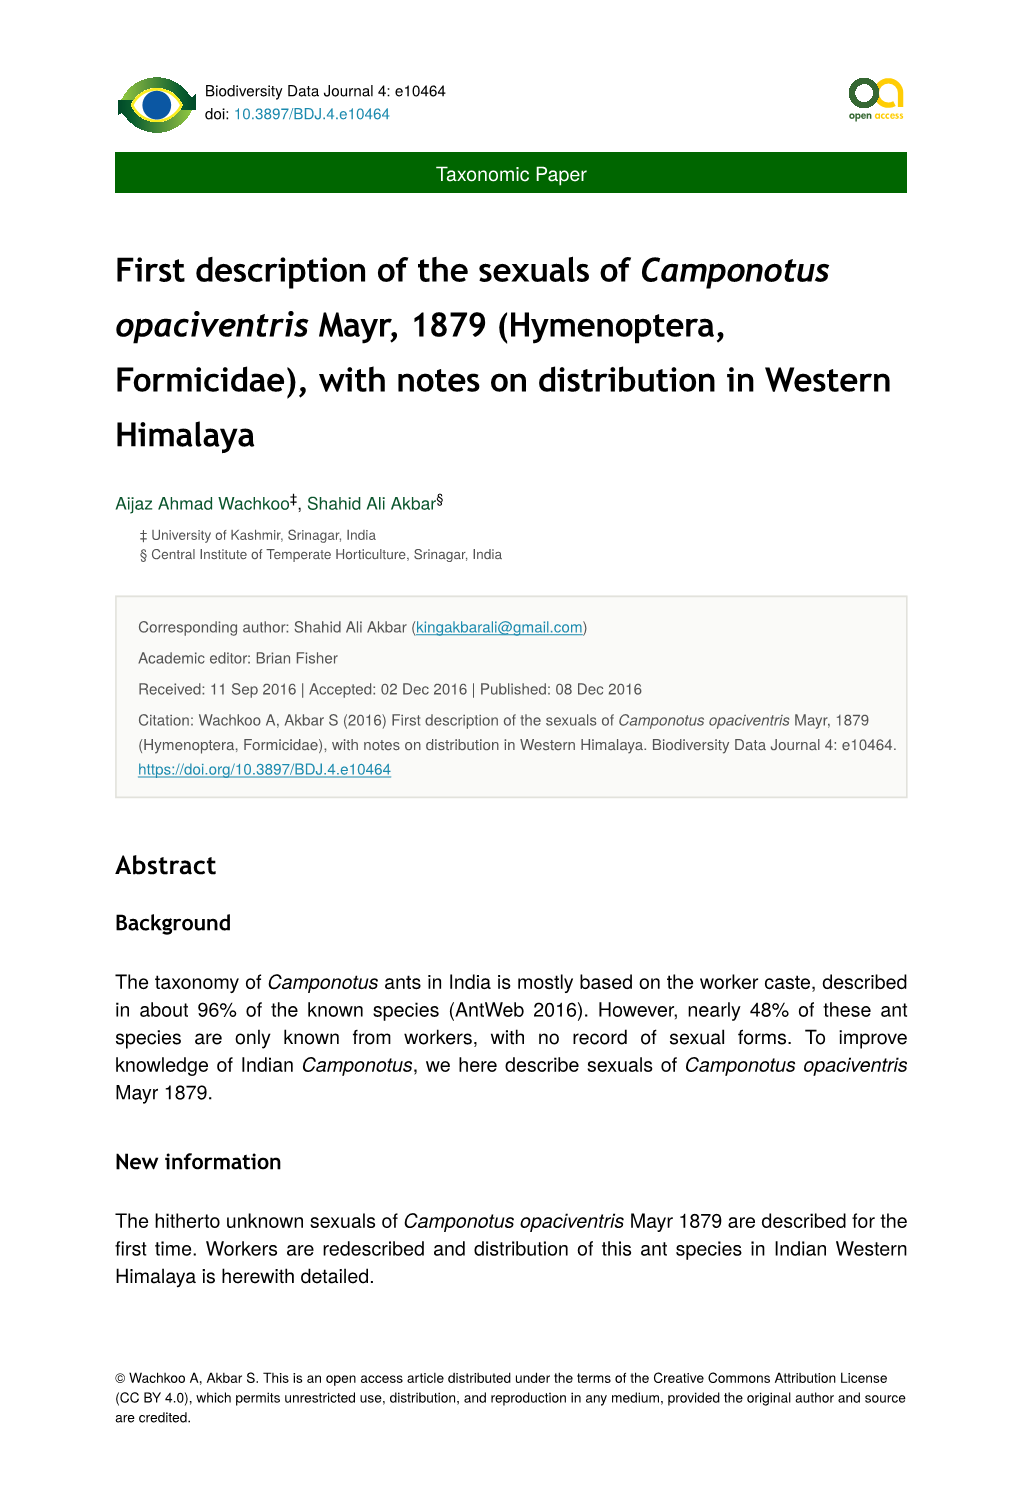 First Description of the Sexuals of Camponotus Opaciventris Mayr, 1879 (Hymenoptera, Formicidae), with Notes on Distribution in Western Himalaya